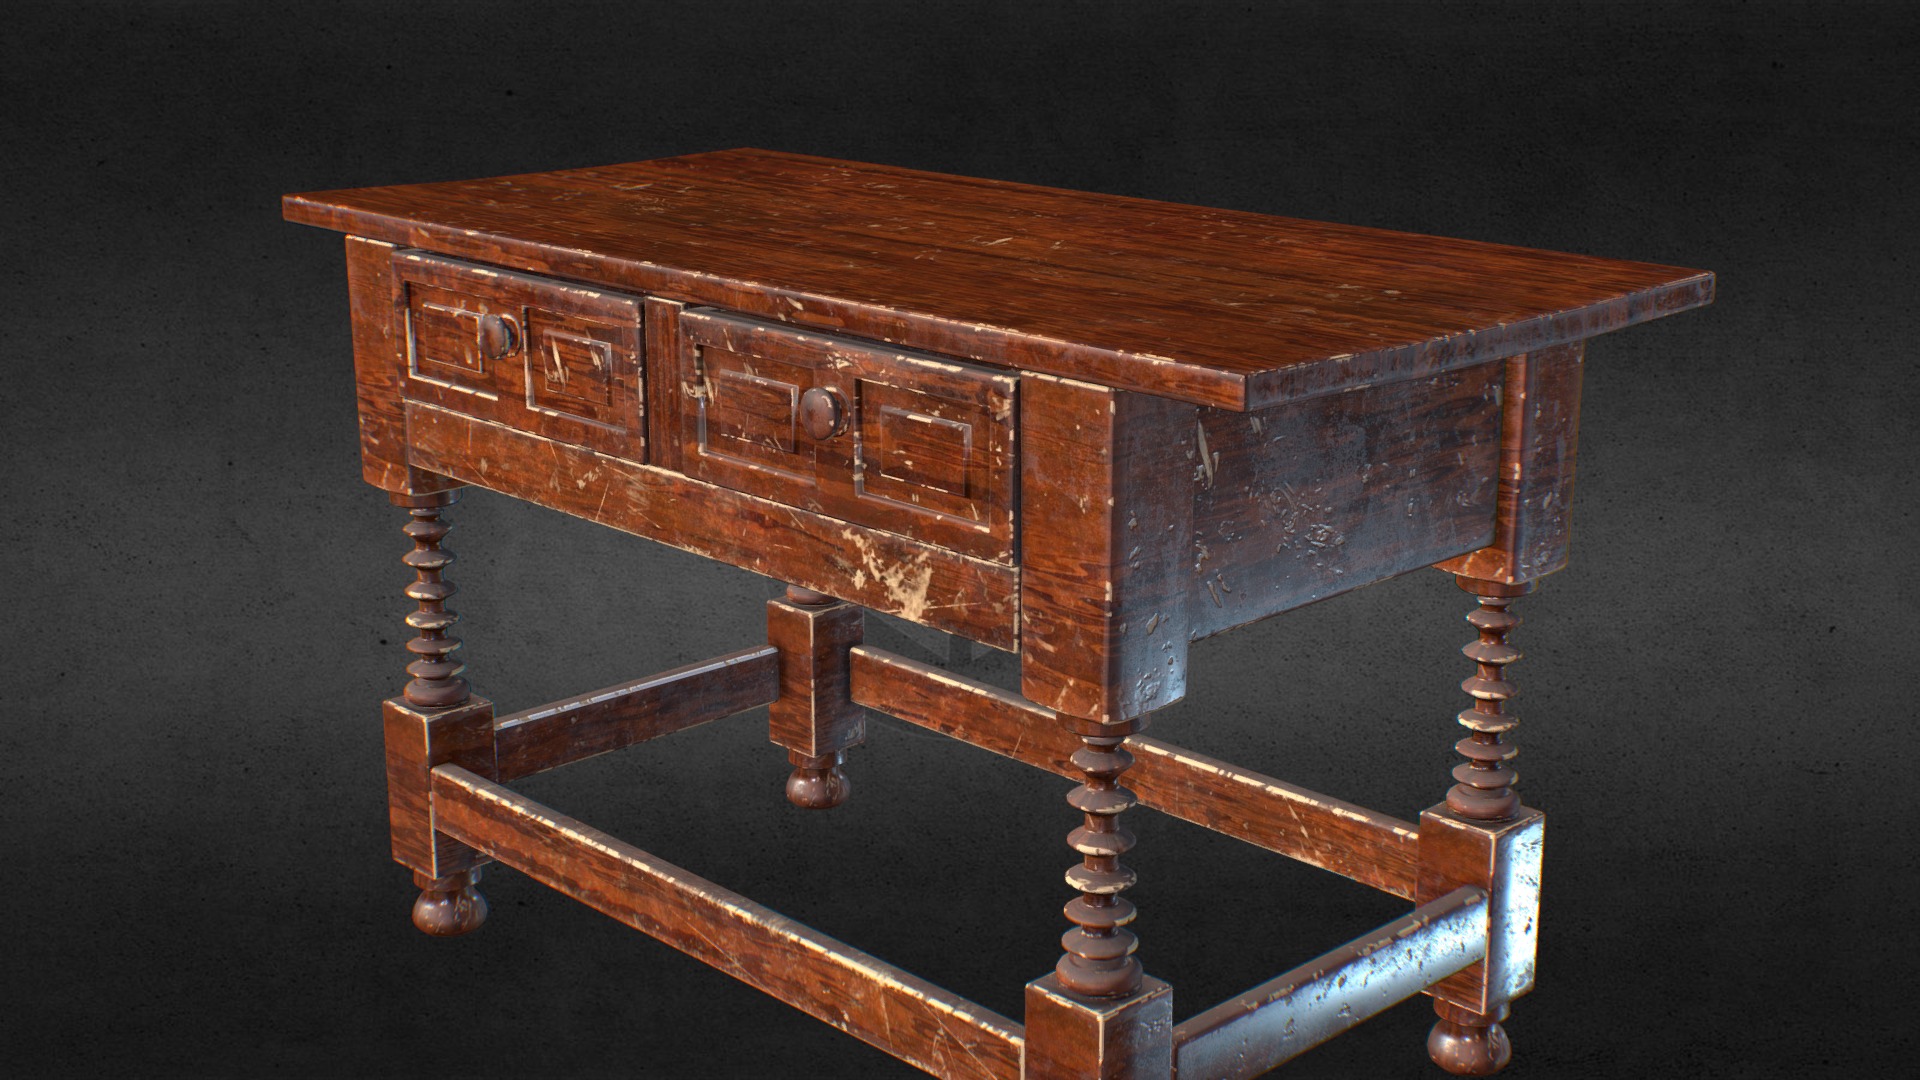 3D model VIntage Desk – Worn - This is a 3D model of the VIntage Desk - Worn. The 3D model is about a wooden chest with drawers.